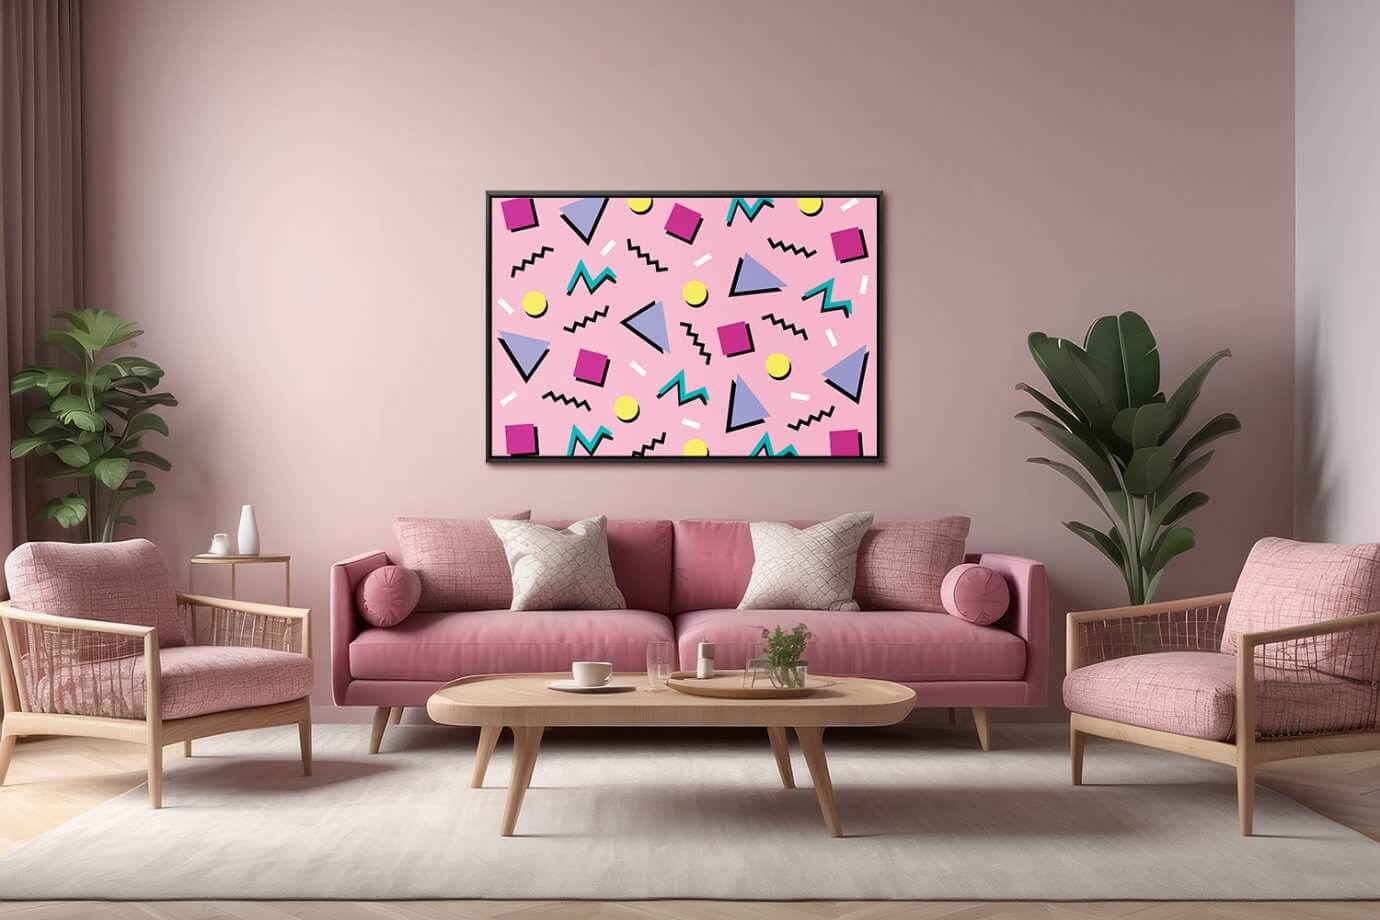 retro patterned artwork above pink couch